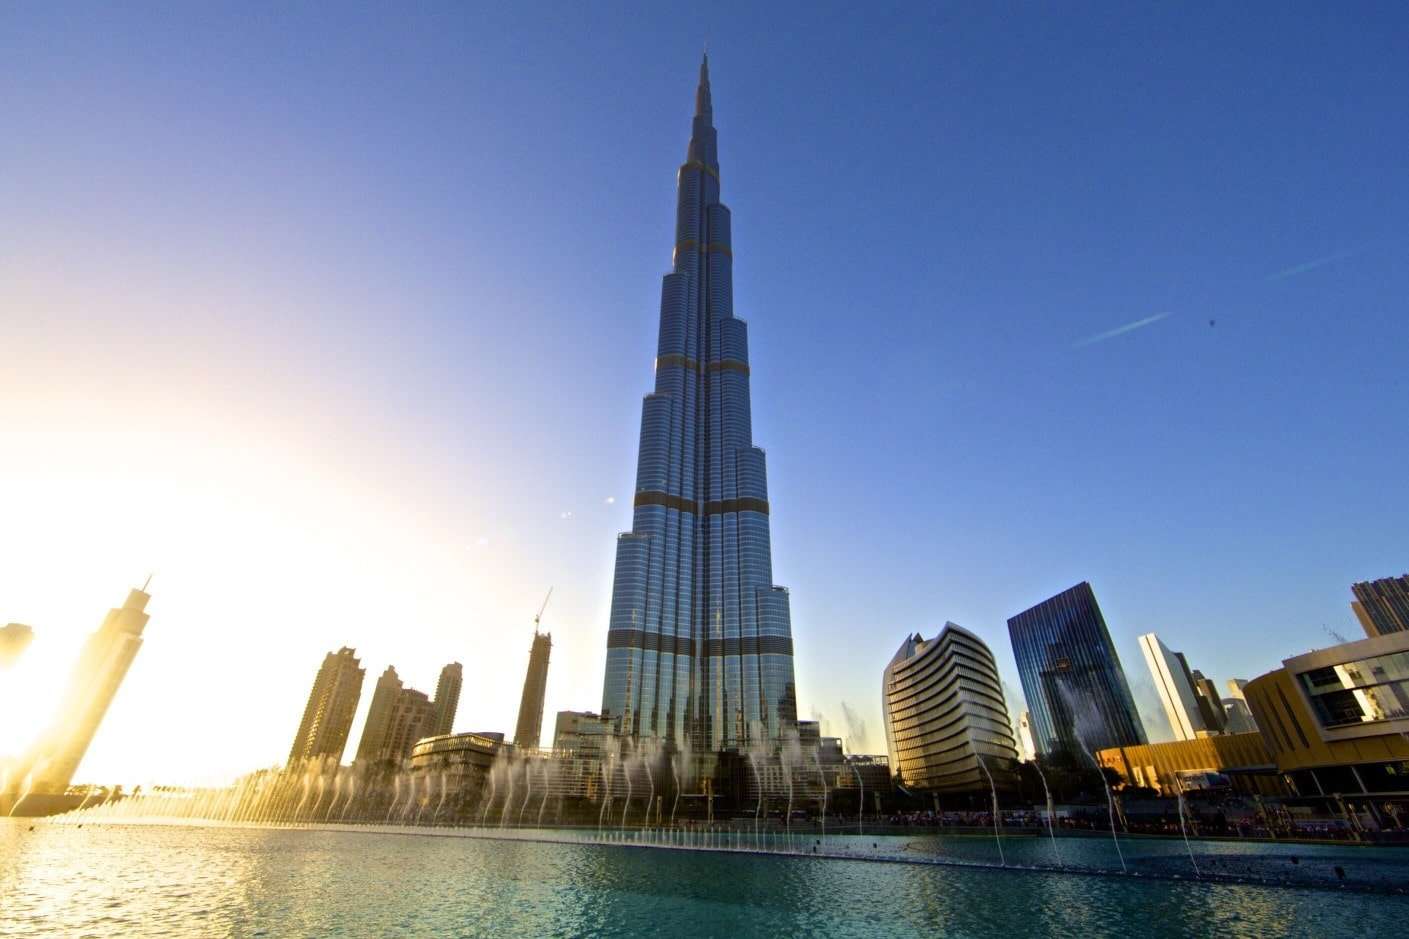 Which is taller between Burj Khalifa and the Eiffel Tower? - Quora